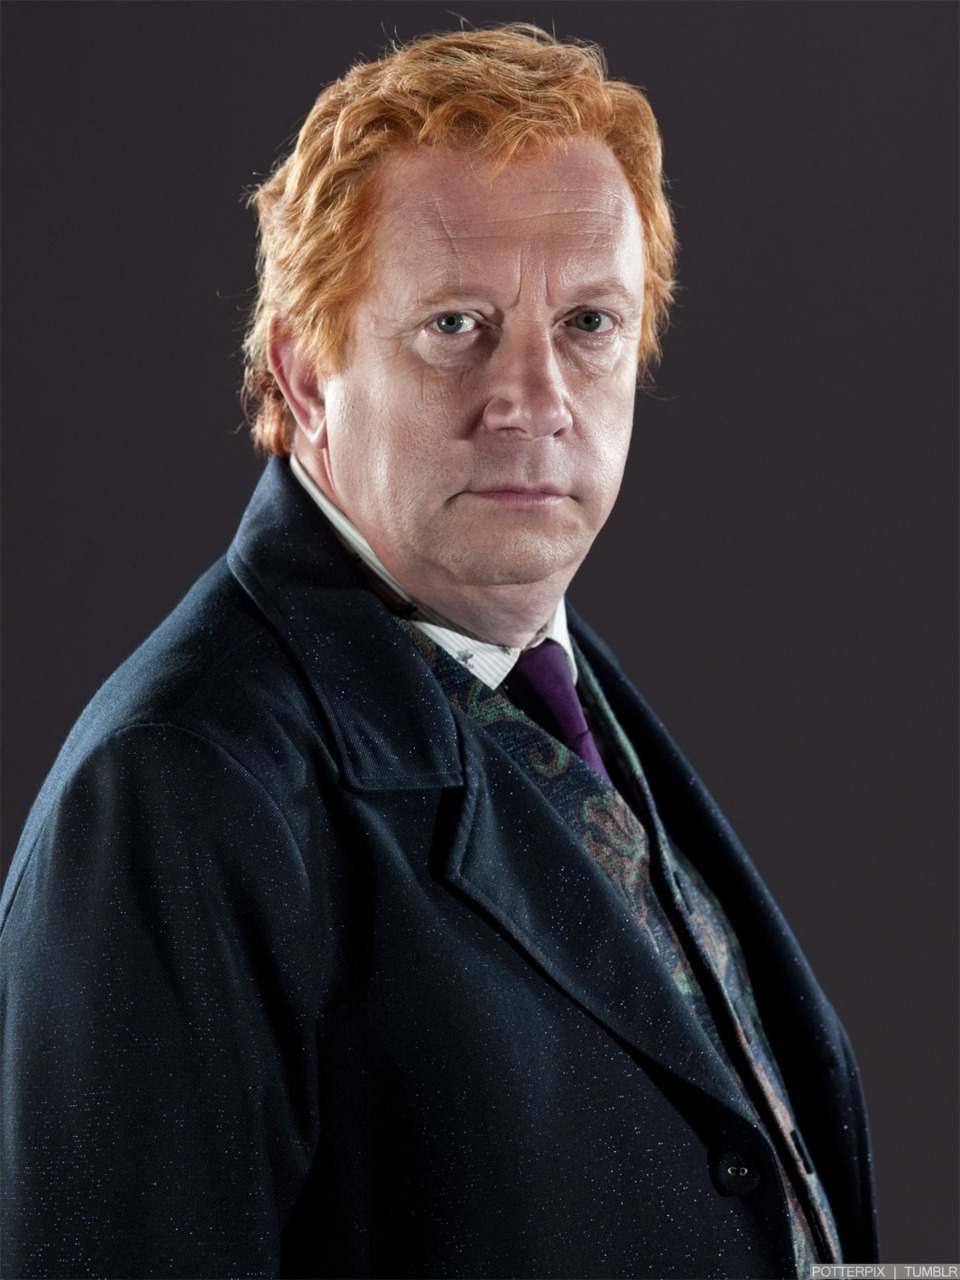 Who played the role of Arthur Weasley in the Harry Potter films? 2